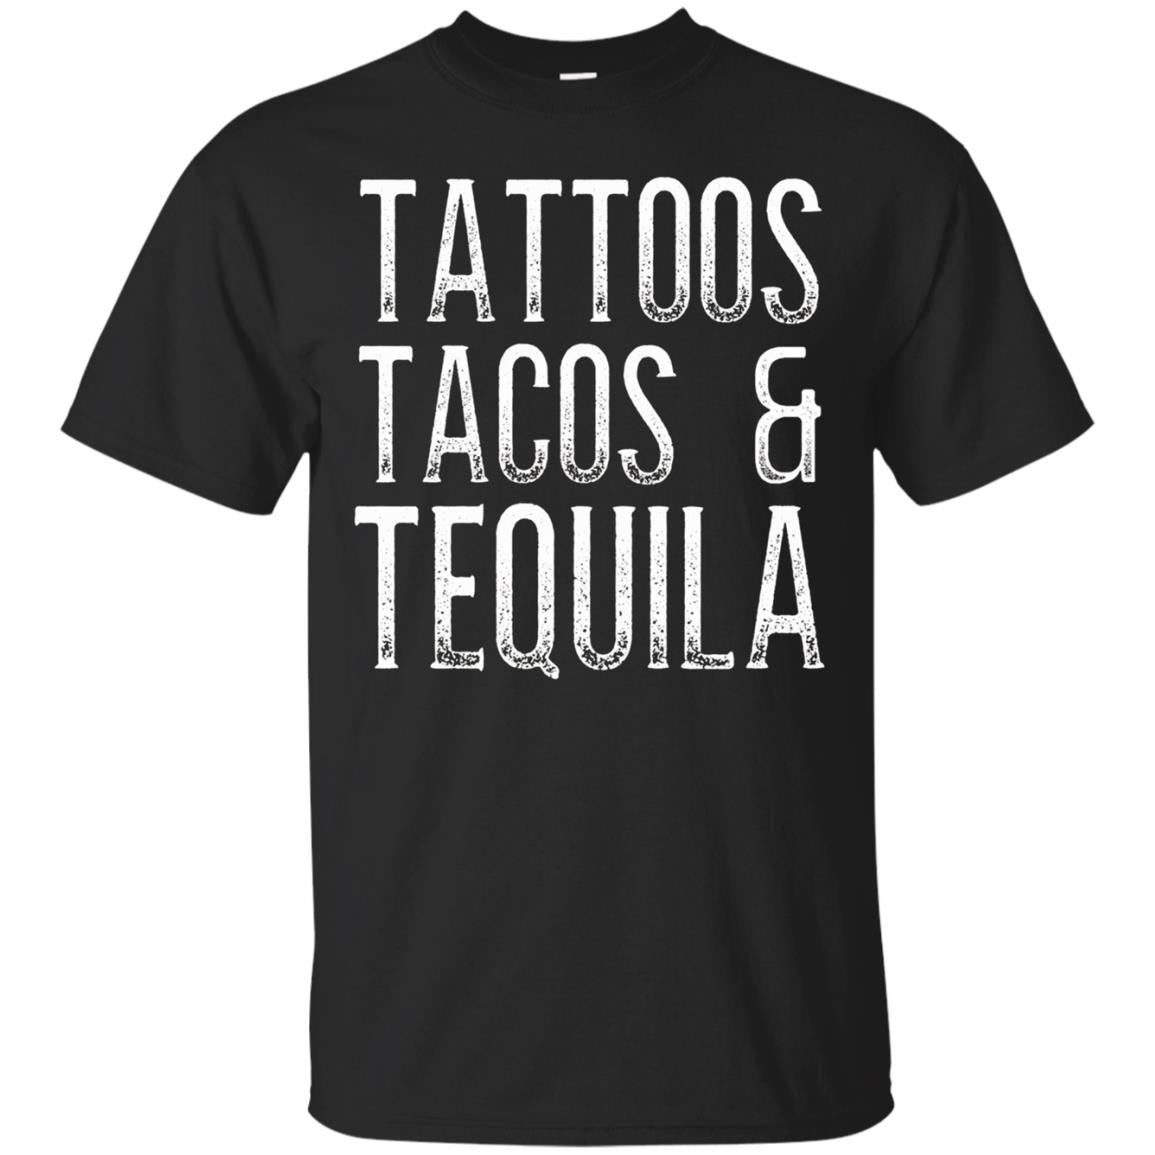 Tattoos Tacos Tequila Mexican Food Alcohol Drink Pun T-shirt